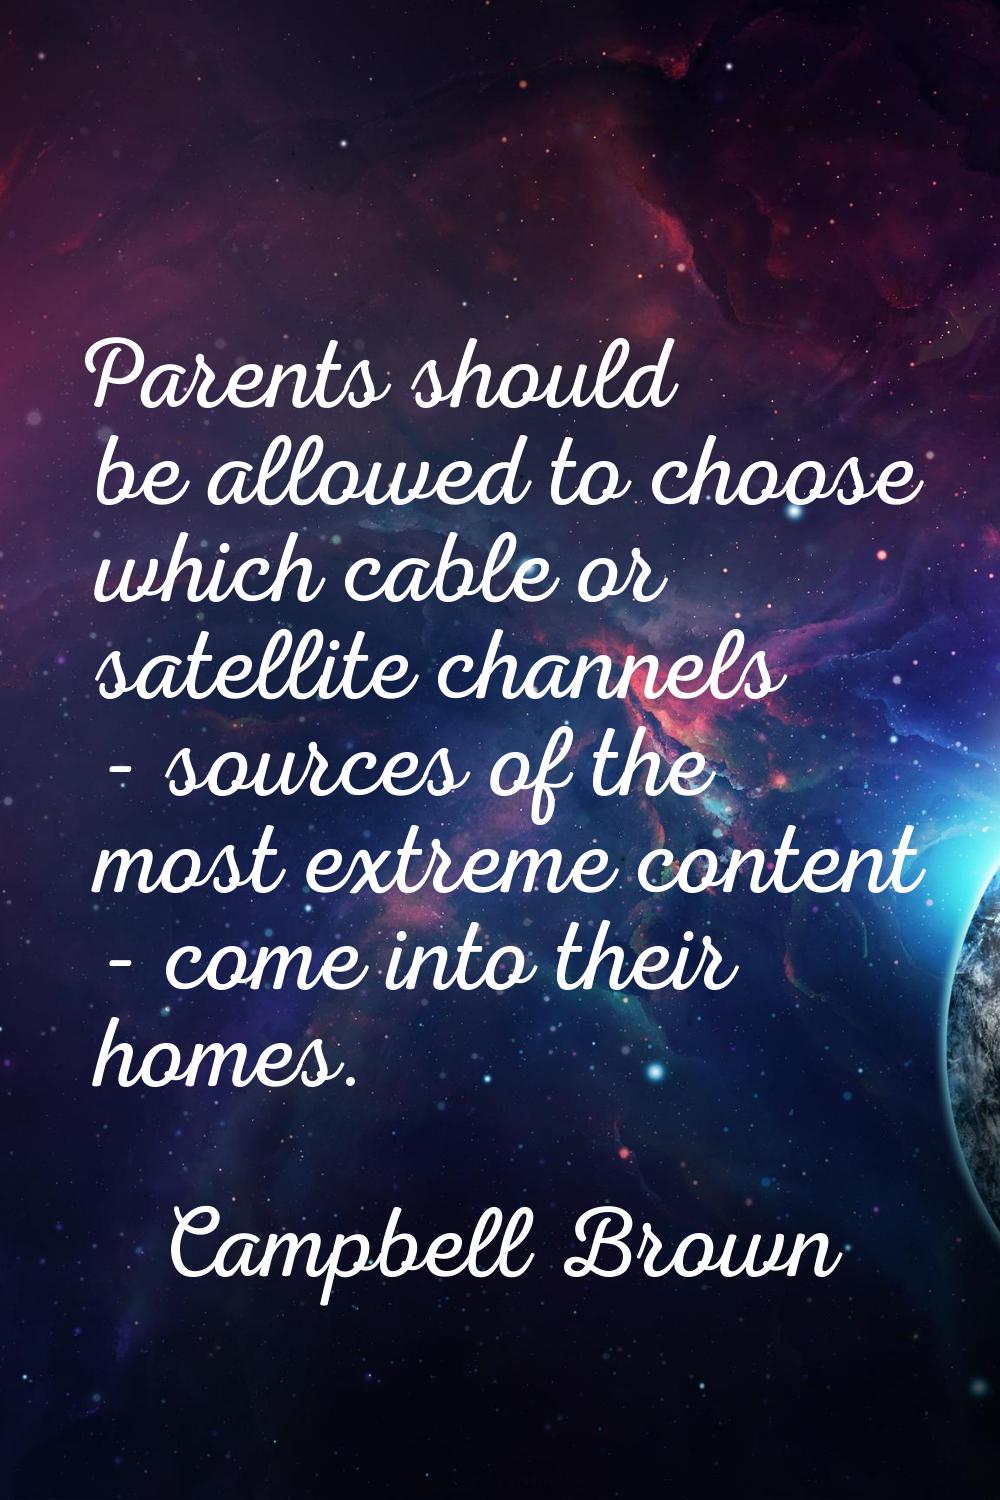 Parents should be allowed to choose which cable or satellite channels - sources of the most extreme